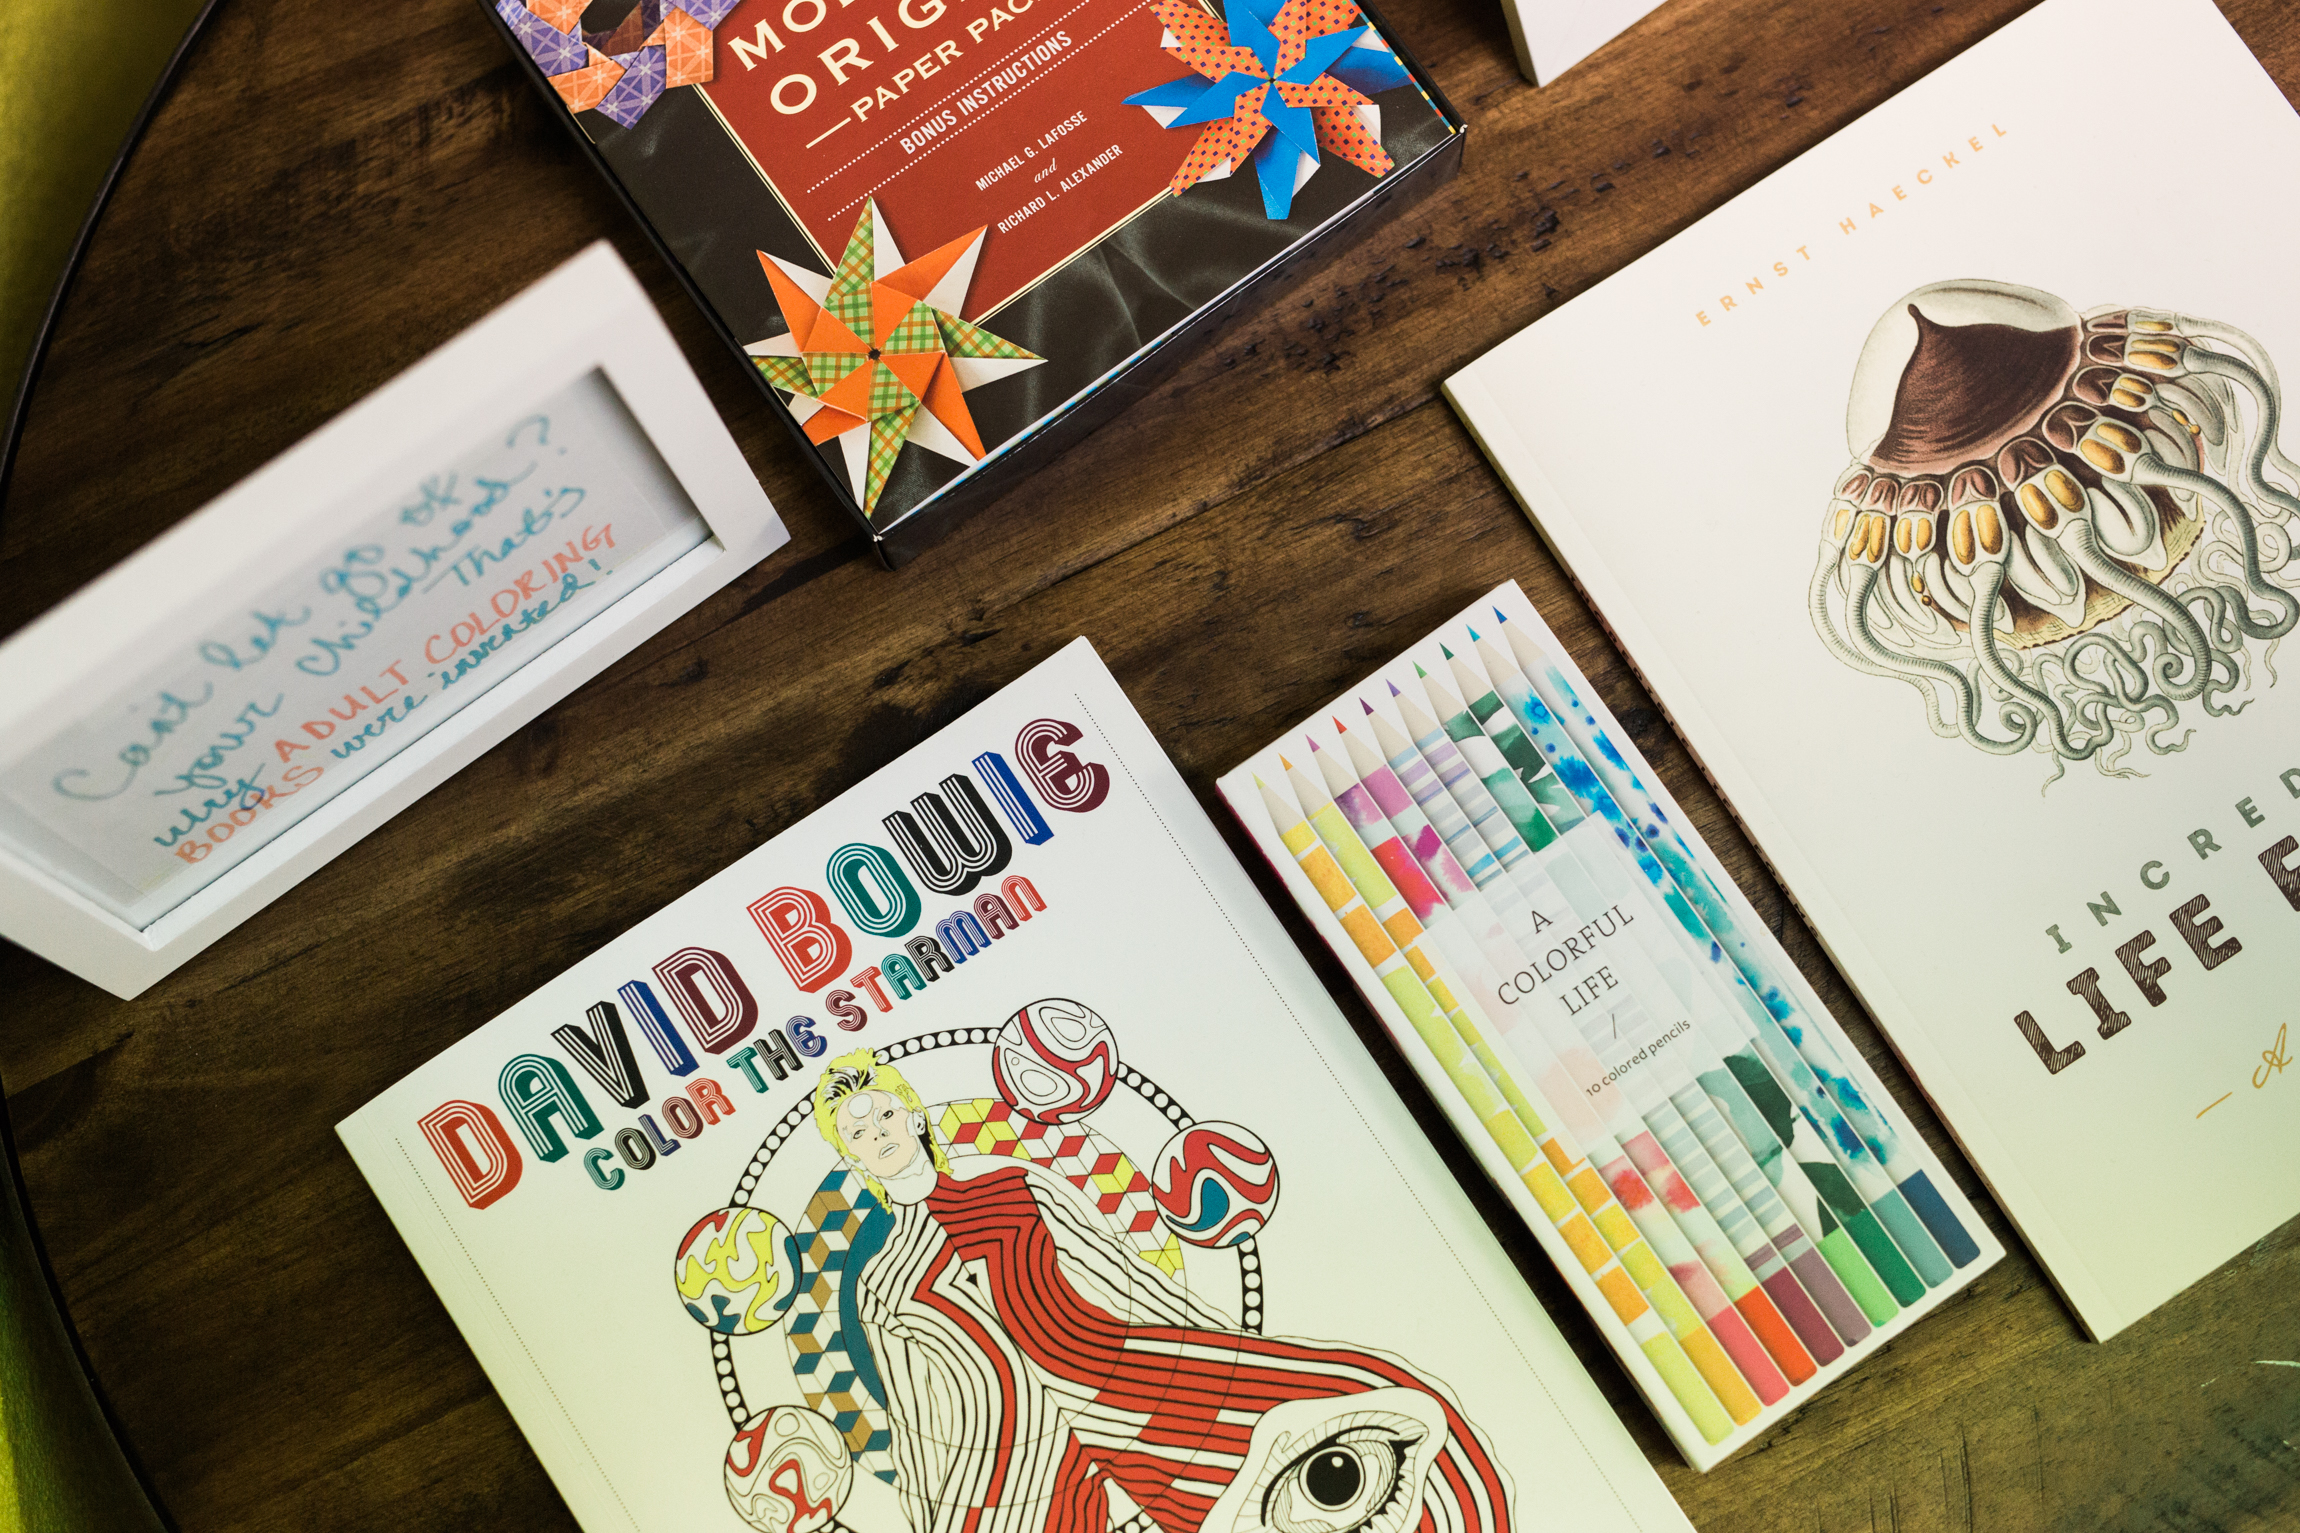  Image shows David Bowie mindfulness coloring book as well as additional therapeutic mindfulness items in the waiting area of Mantis Massage in Austin TX. Immerse yourself in creative relaxation as you await your personalized massage experience. 